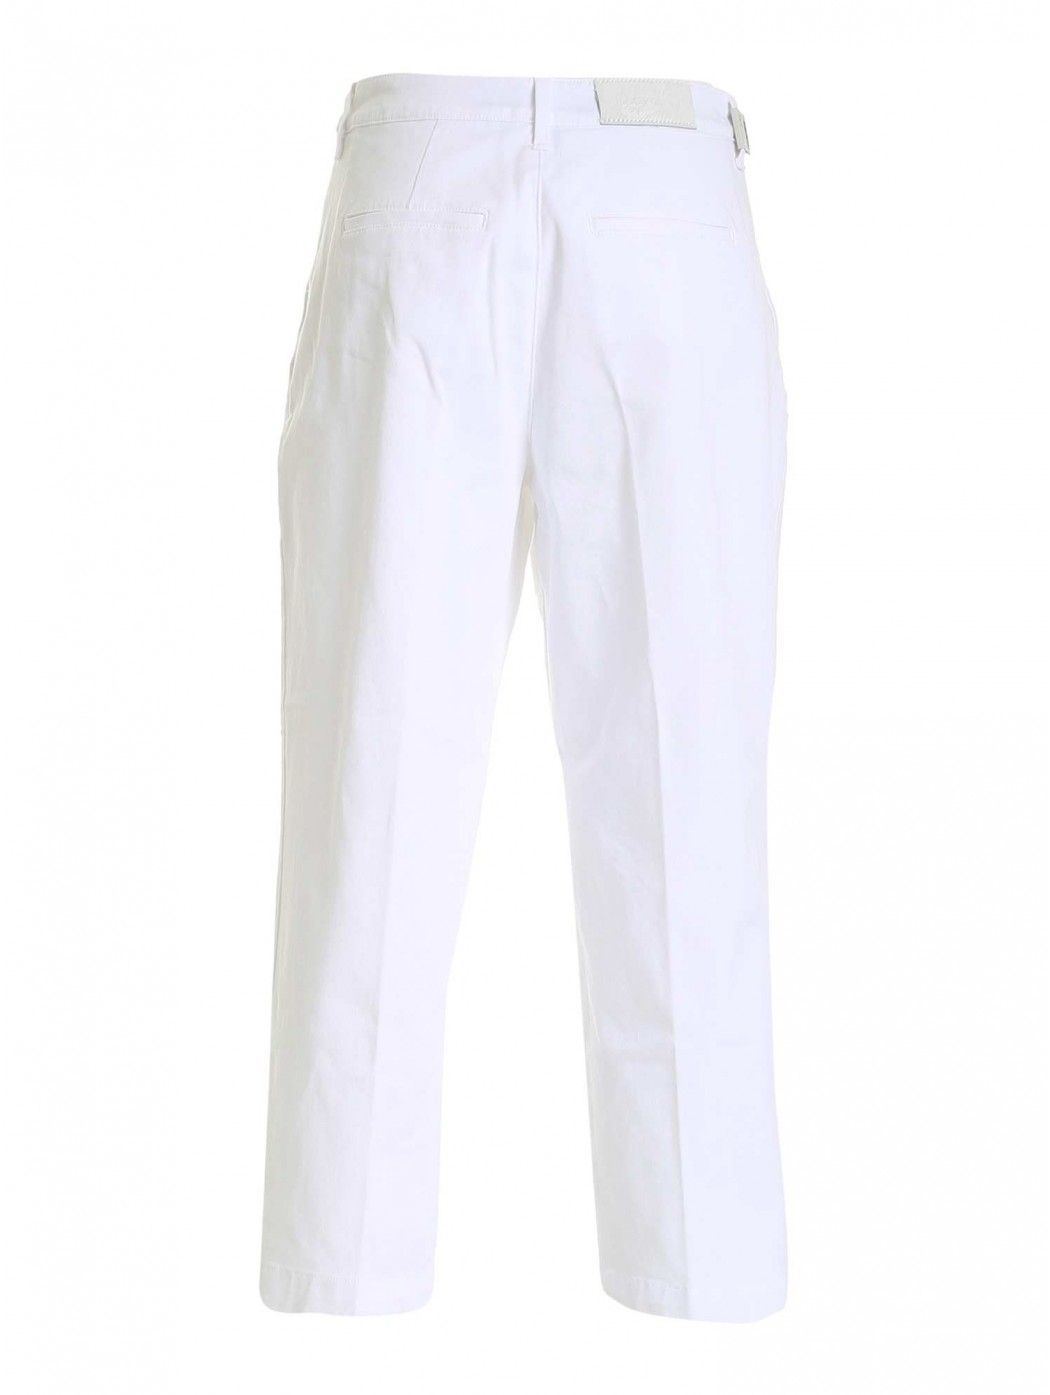 CHINO PPT STR SOLID  JACOB COHEN DONNA